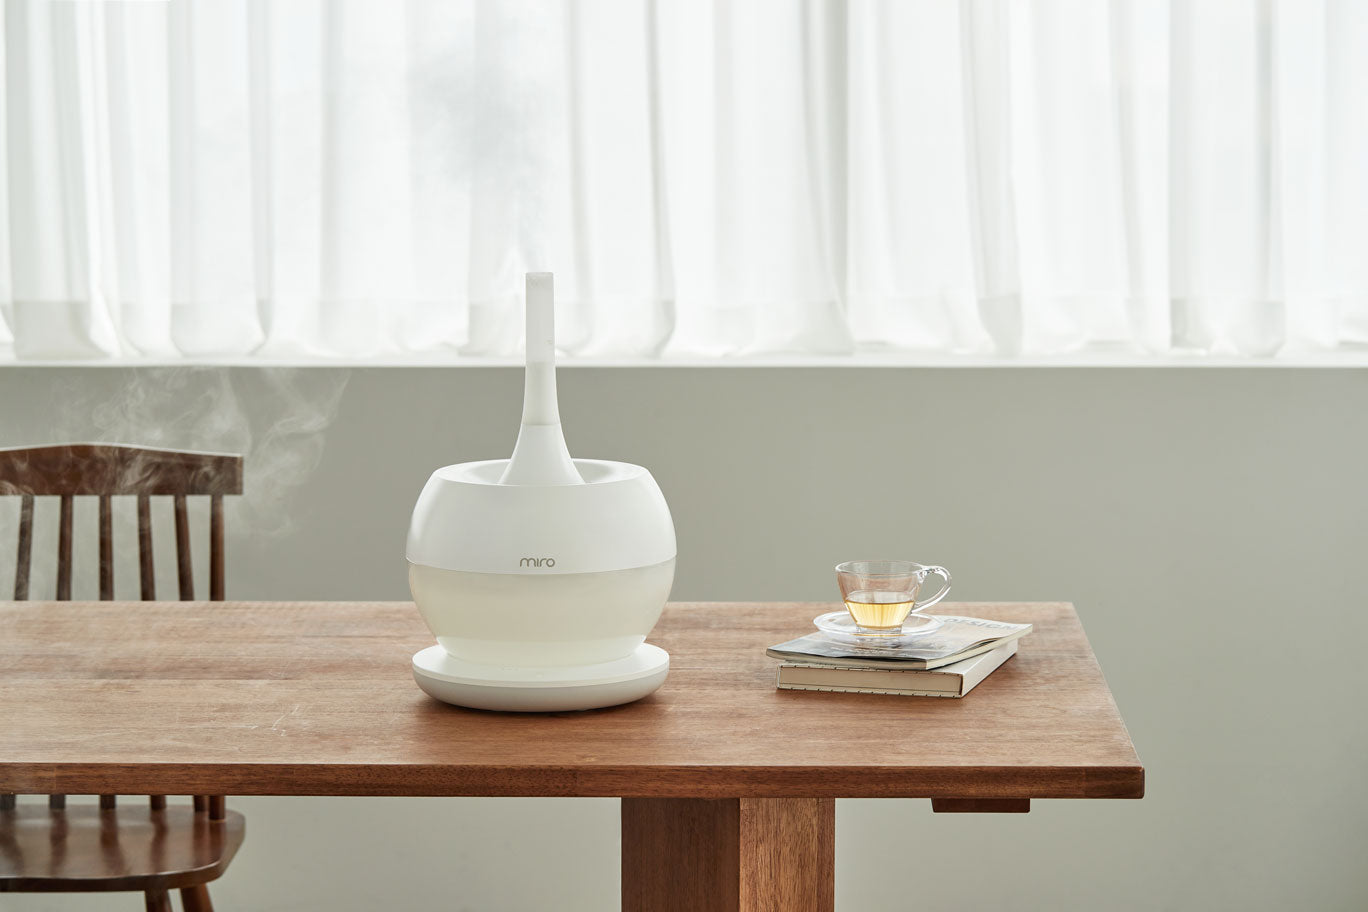 Top 5 Best & Cleanest Humidifiers - Top Humidifiers Reviewed By Experts